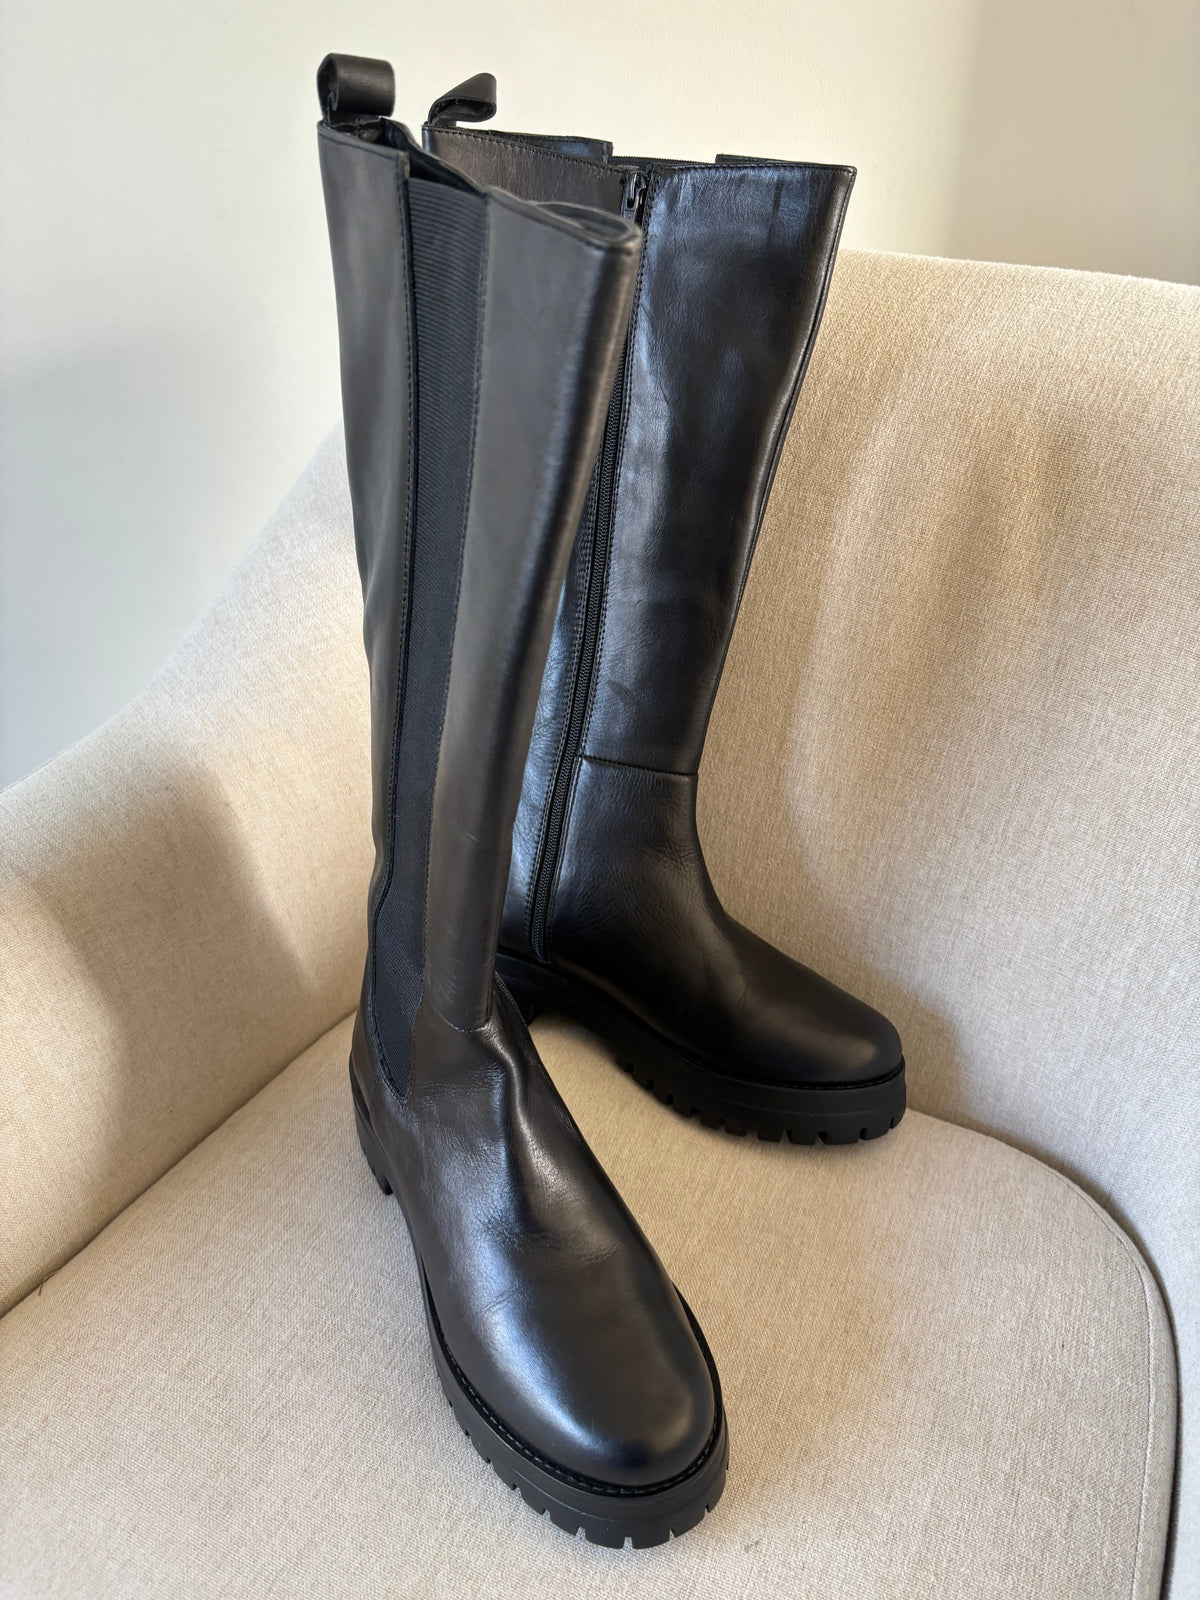 Black Leather Chunky Long Boots by Freemans Size 7